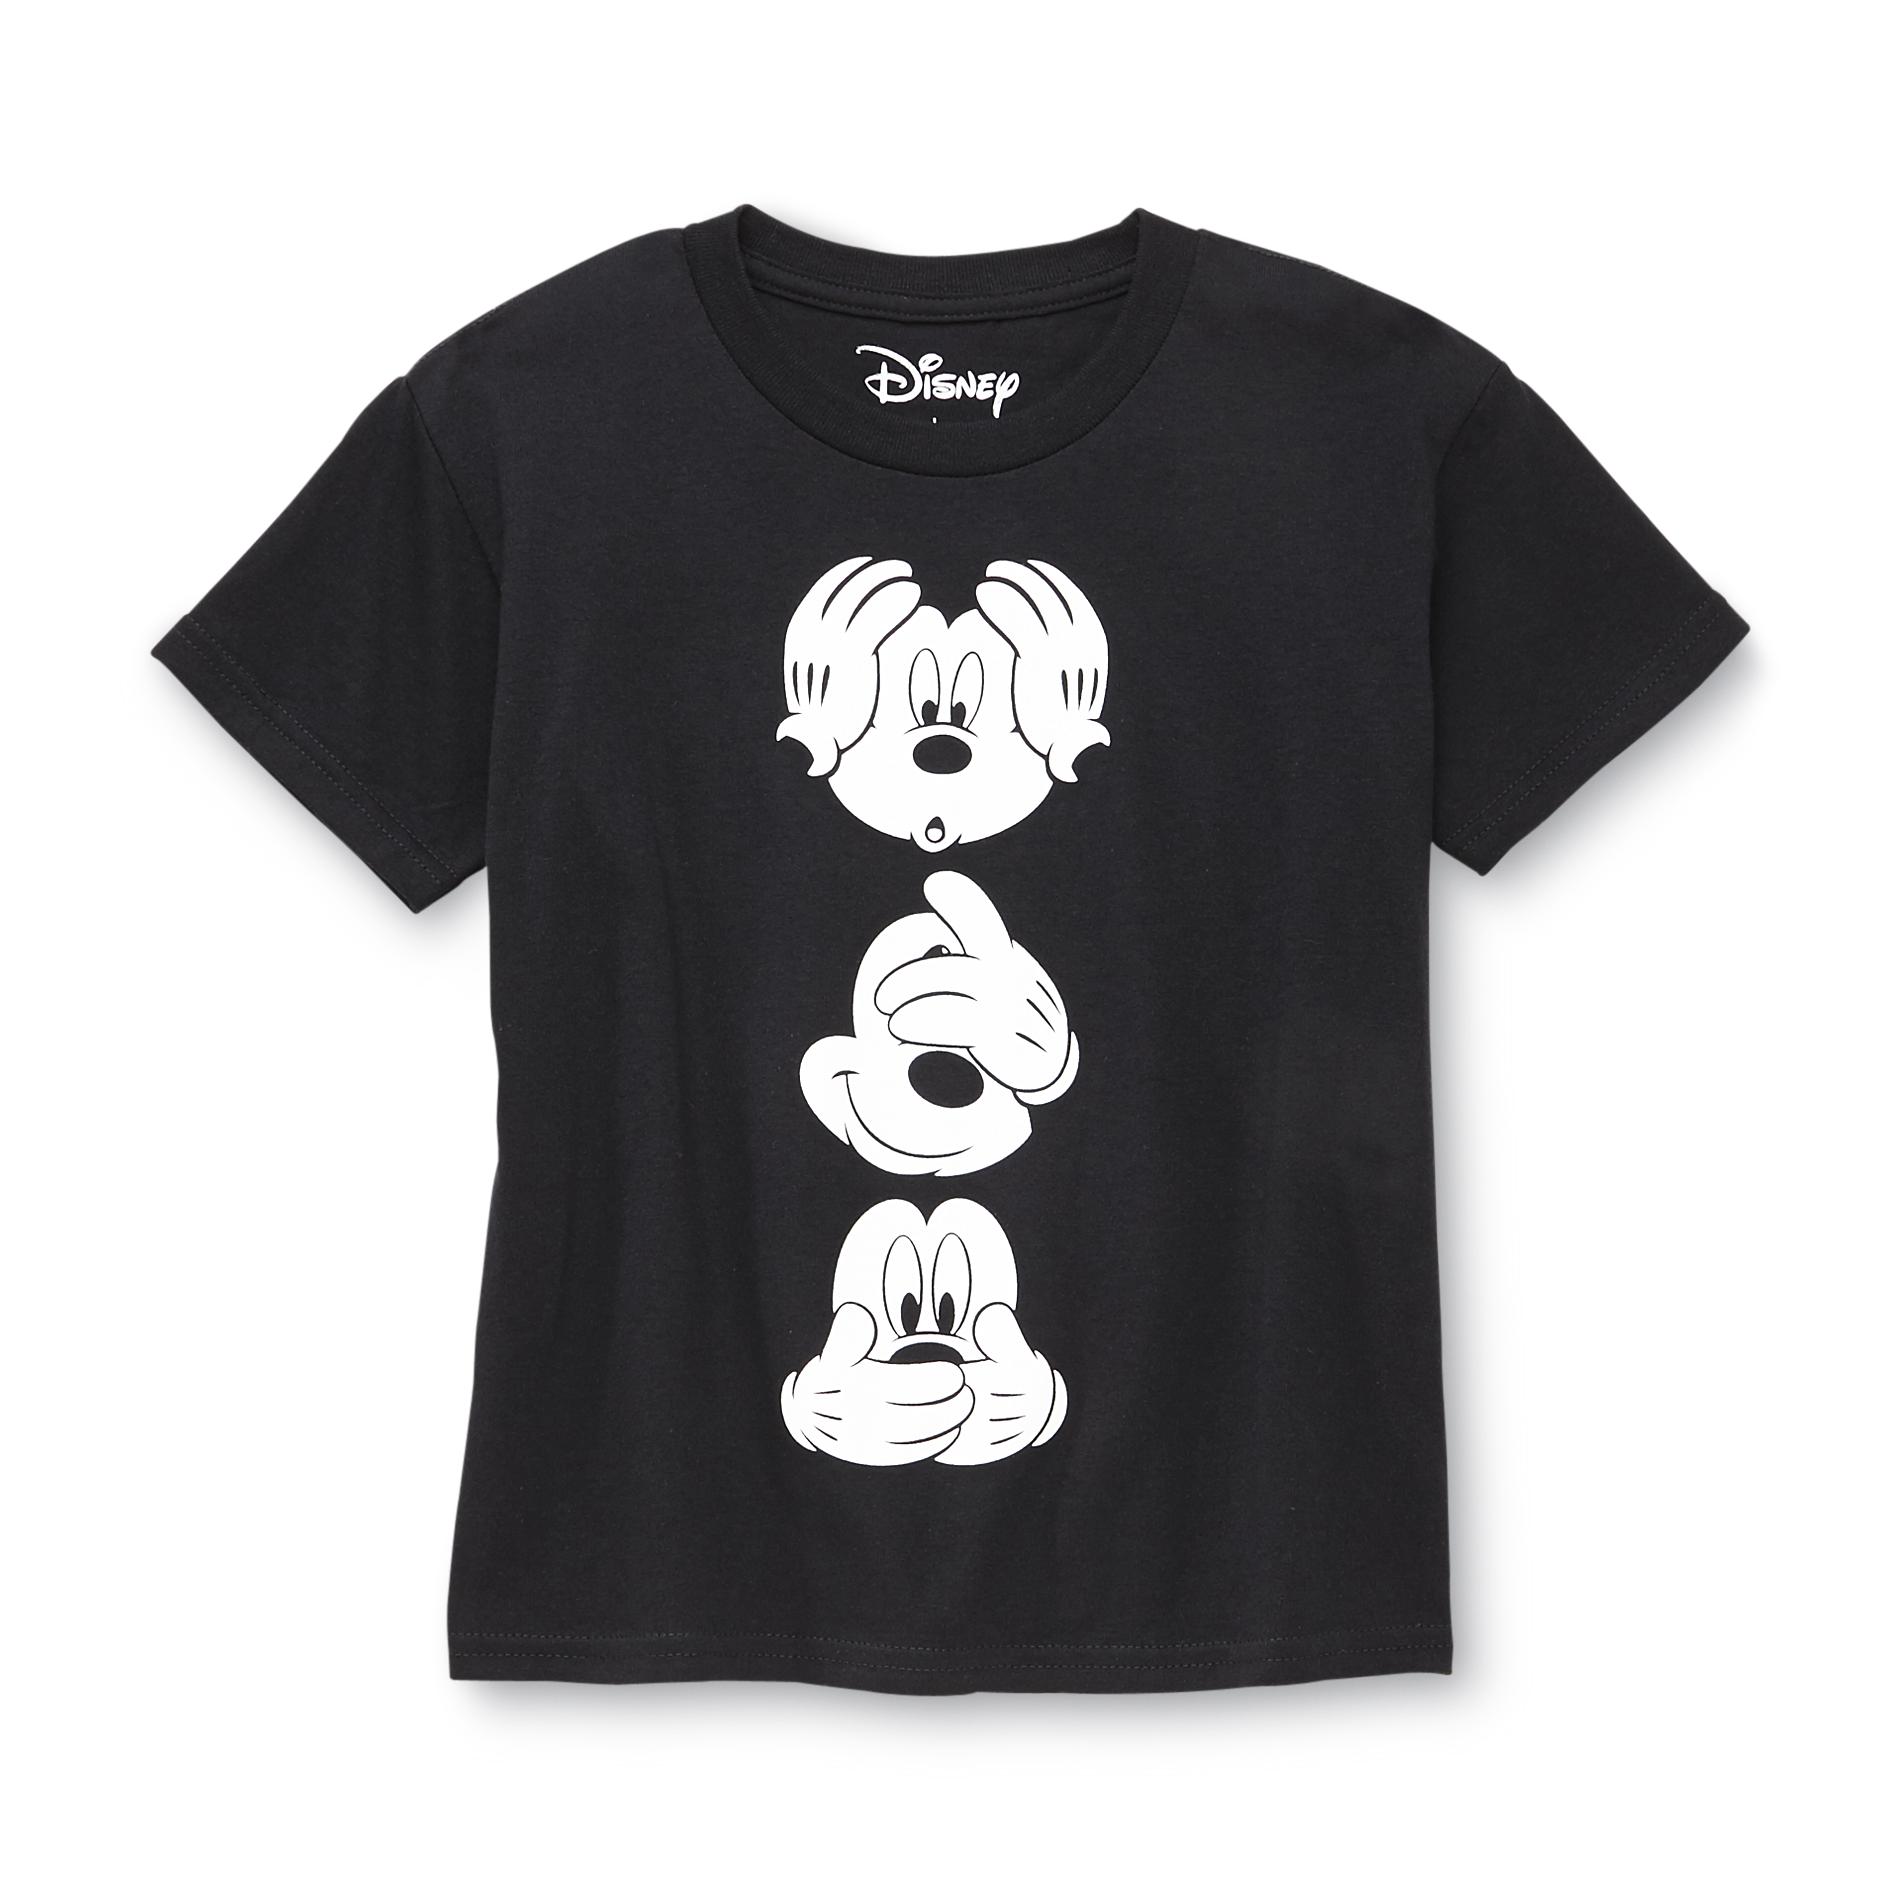 Disney Boy's Graphic T-Shirt - Mickey Mouse